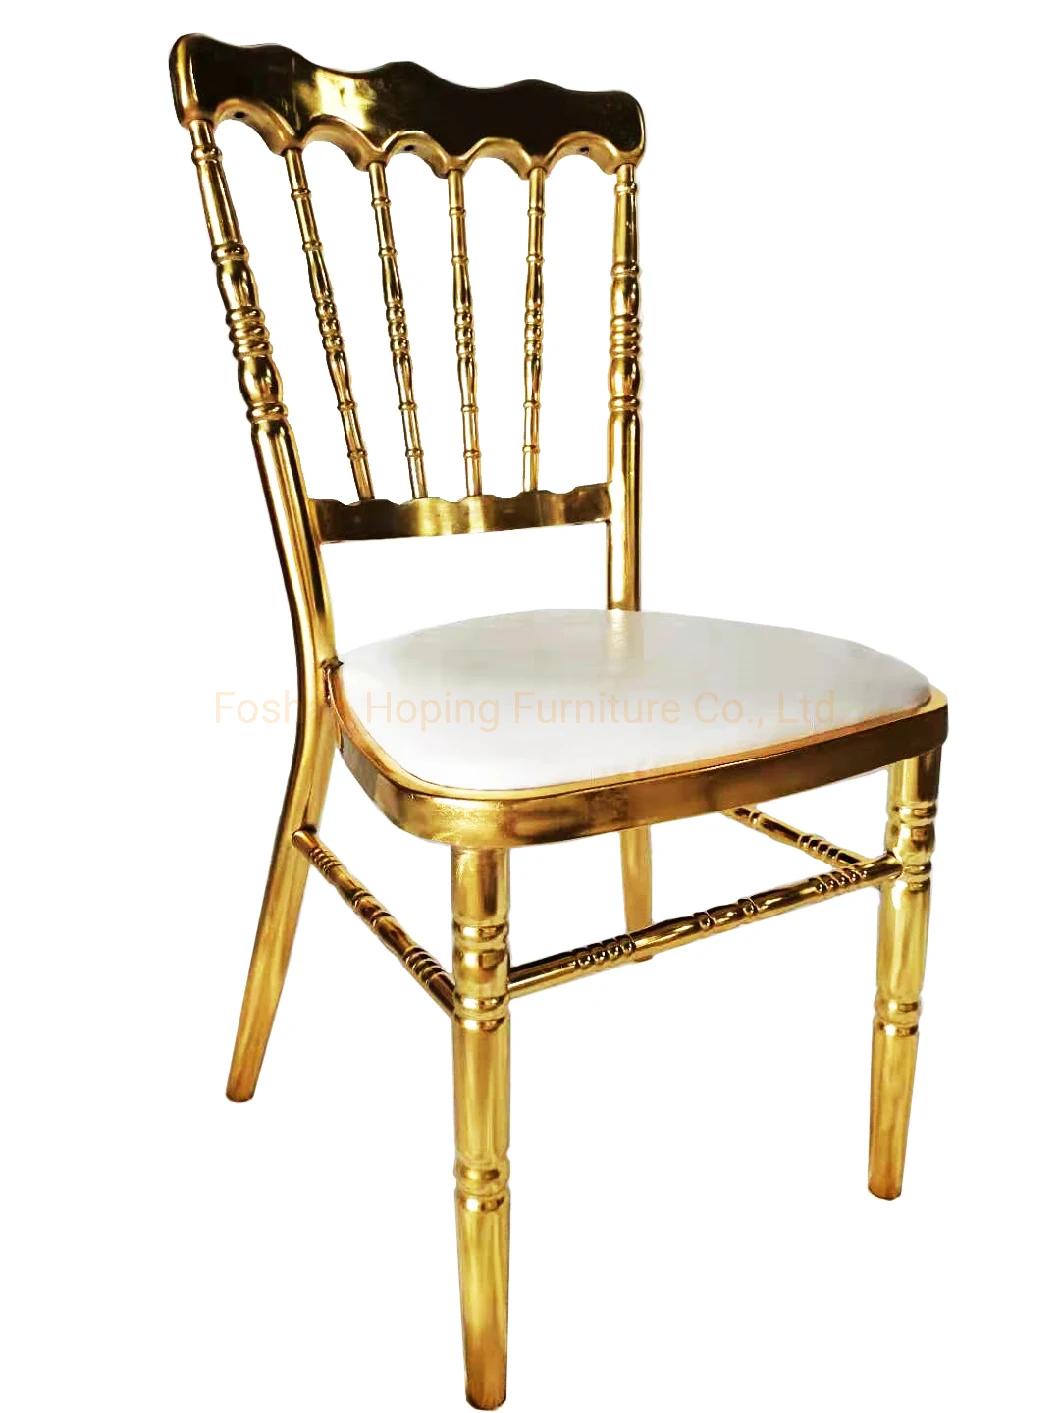 White Gold Cross Back Chairs Wholesale White Wedding Hotel Furniture China Chameleon Event Dining Chairs